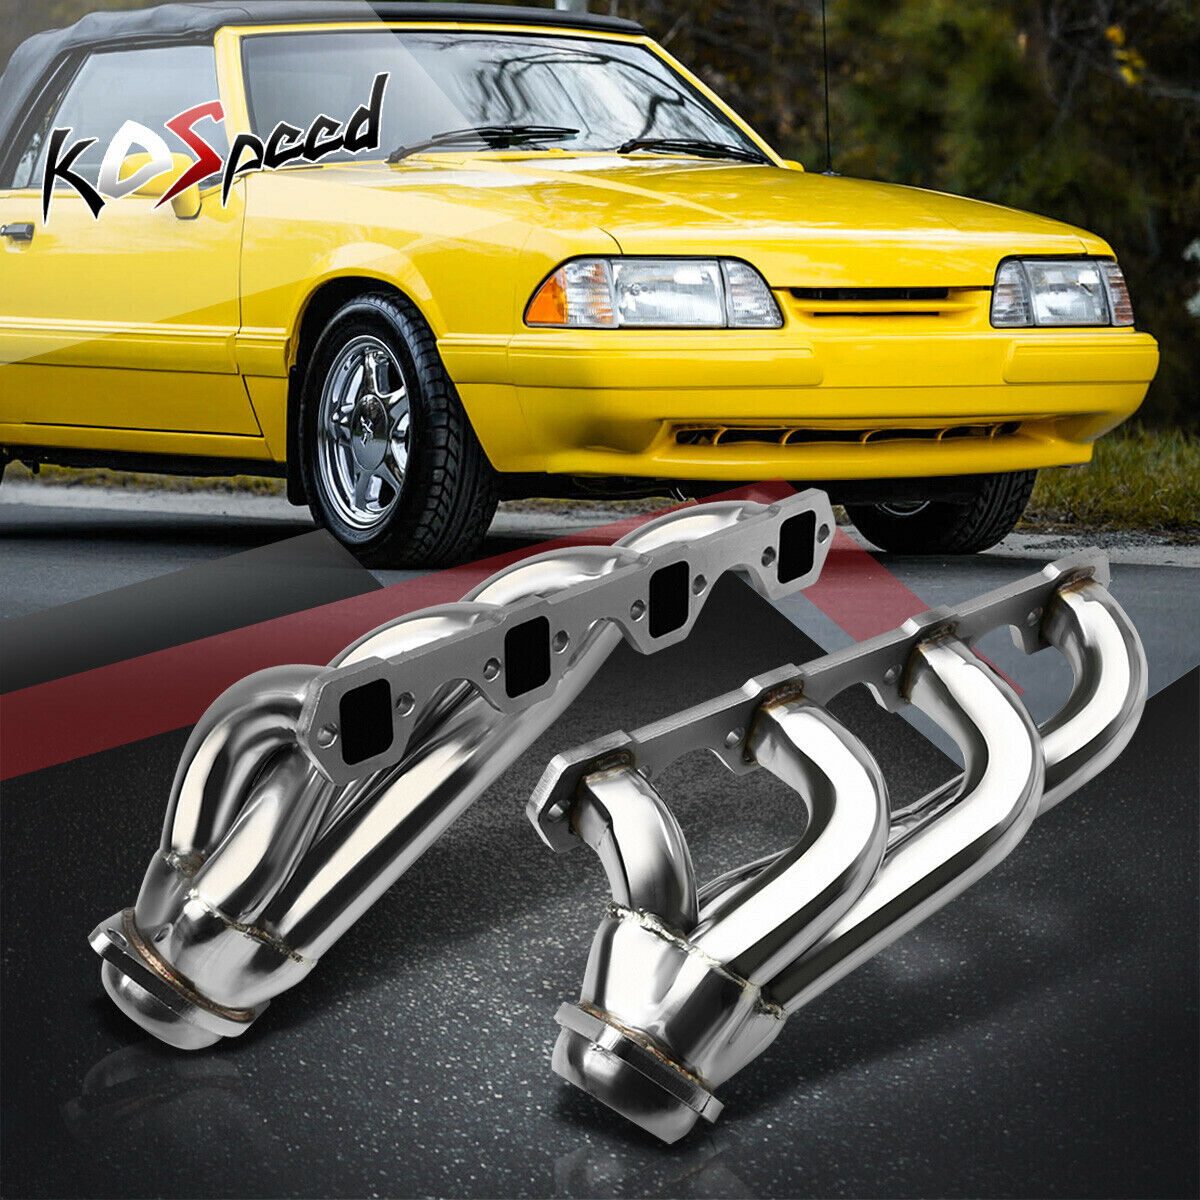 STAINLESS STEEL SHORTY HEADER EXHAUST MANIFOLD FOR 79-93 FORD MUSTANG 5.0 302 V8